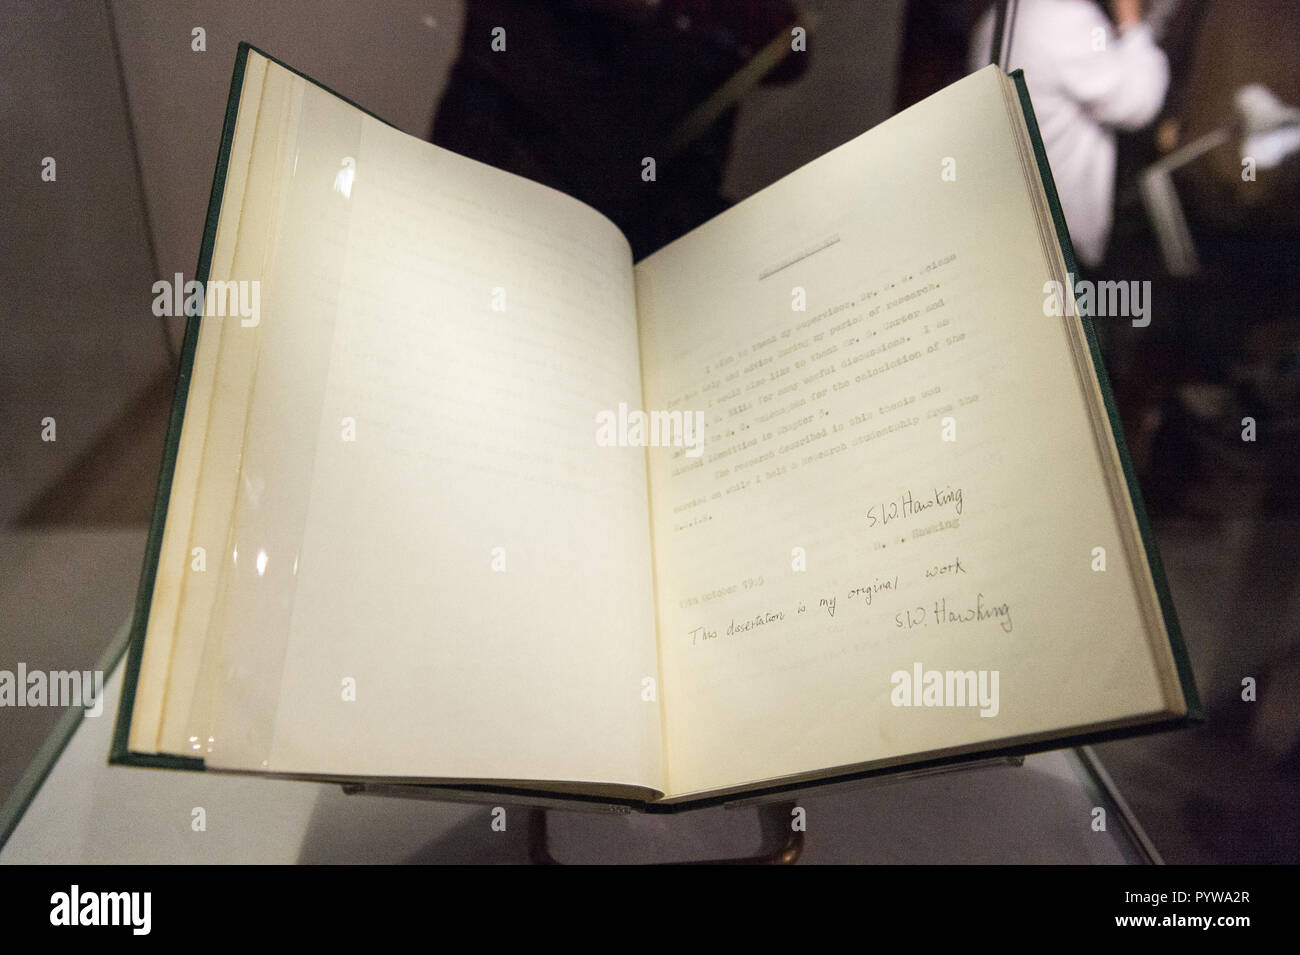 London, Britain. 30th Oct, 2018. A copy of Stephen Hawking's Cambridge University Ph.D. thesis is seen during a photocall for an online auction in London, Britain, on Oct. 30, 2018. An online sale of 22 items from the late physicist Stephen Hawking by auctioneer Christie's will open for bids on Oct. 31. The auction will include some of Hawking's complex scientific papers, one of his iconic wheelchairs and a script from the famous TV comedy show 'The Simpsons.' Credit: Ray Tang/Xinhua/Alamy Live News Stock Photo